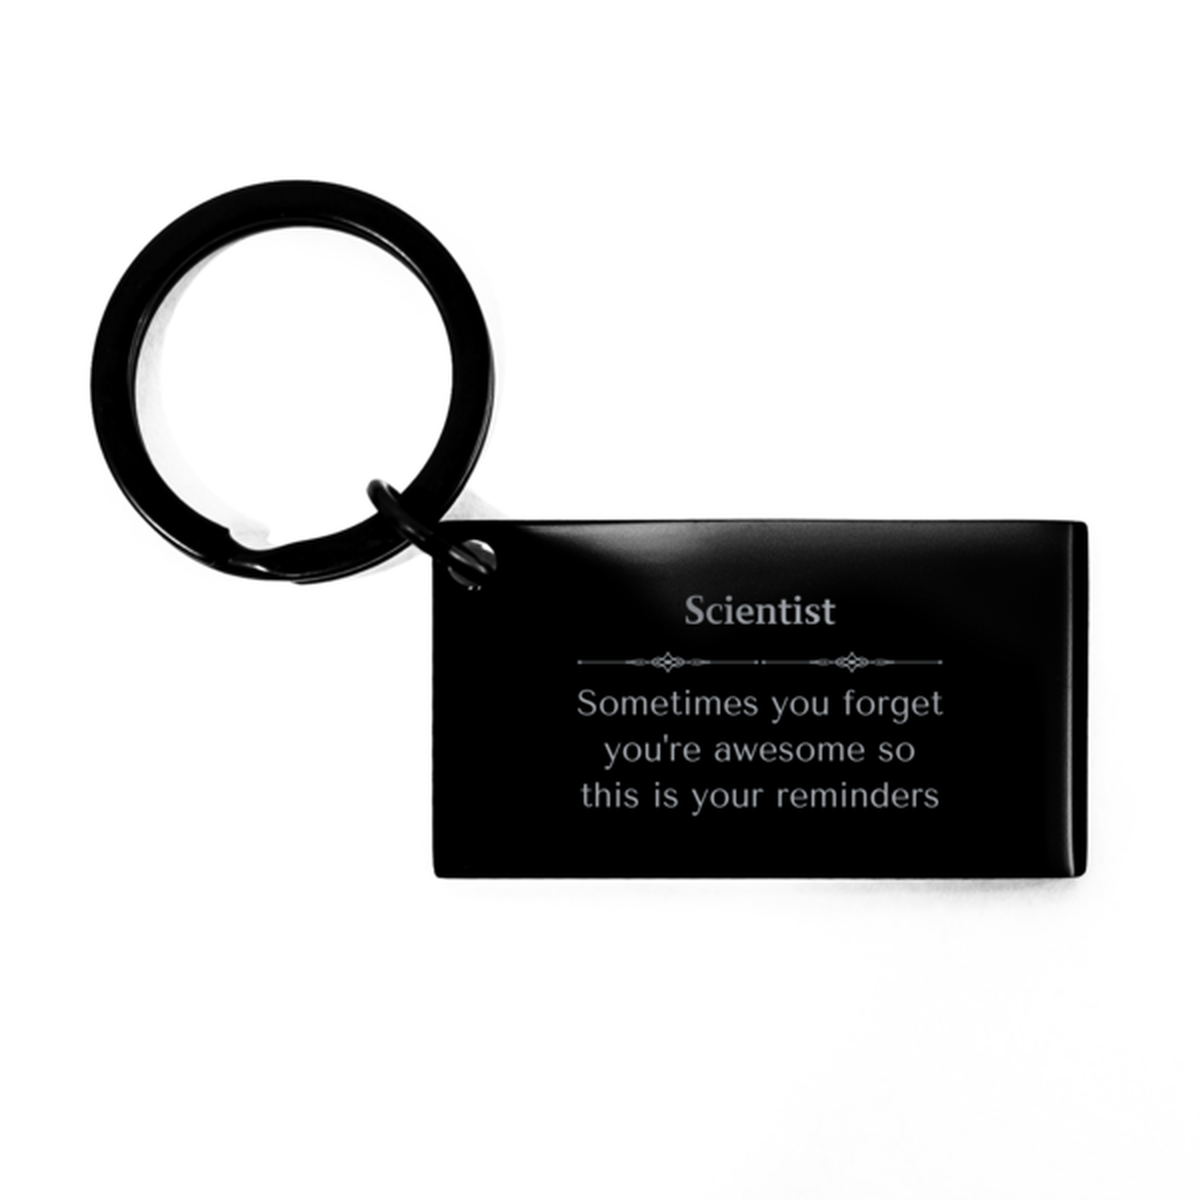 Sentimental Scientist Keychain, Truck Driver Sometimes you forget you're awesome so this is your reminders, Graduation Christmas Birthday Gifts for Scientist, Men, Women, Coworkers